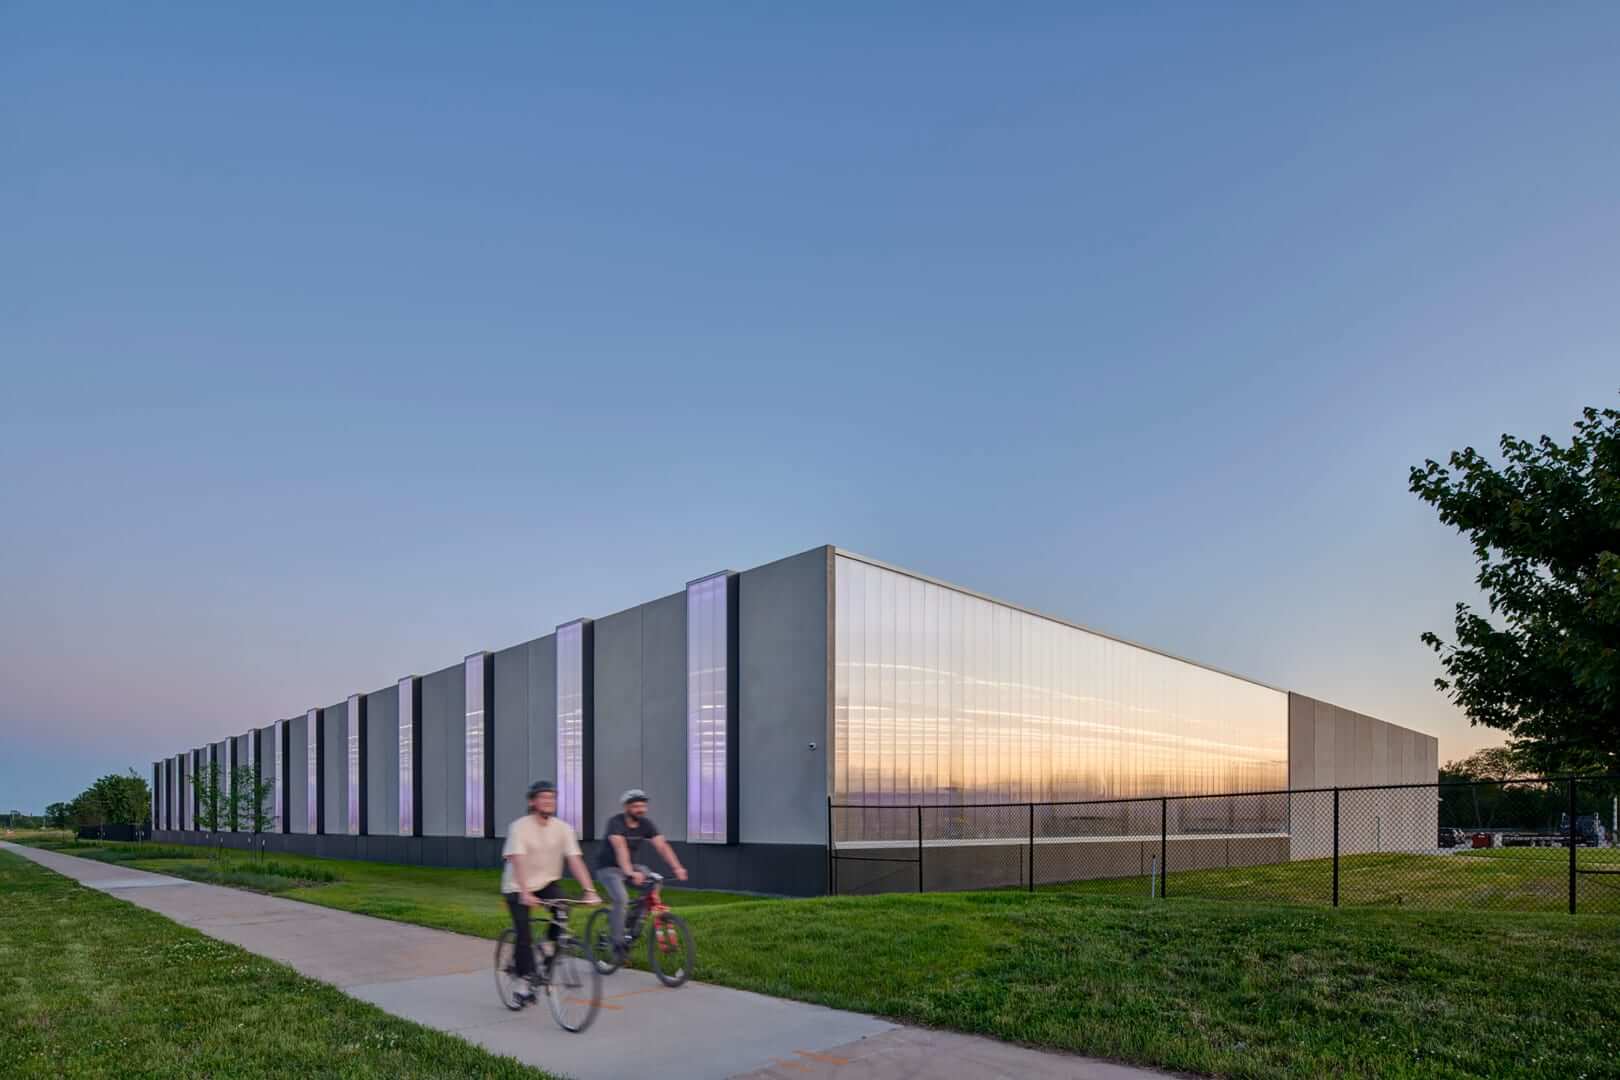 people ride bikes by a long, windowless building